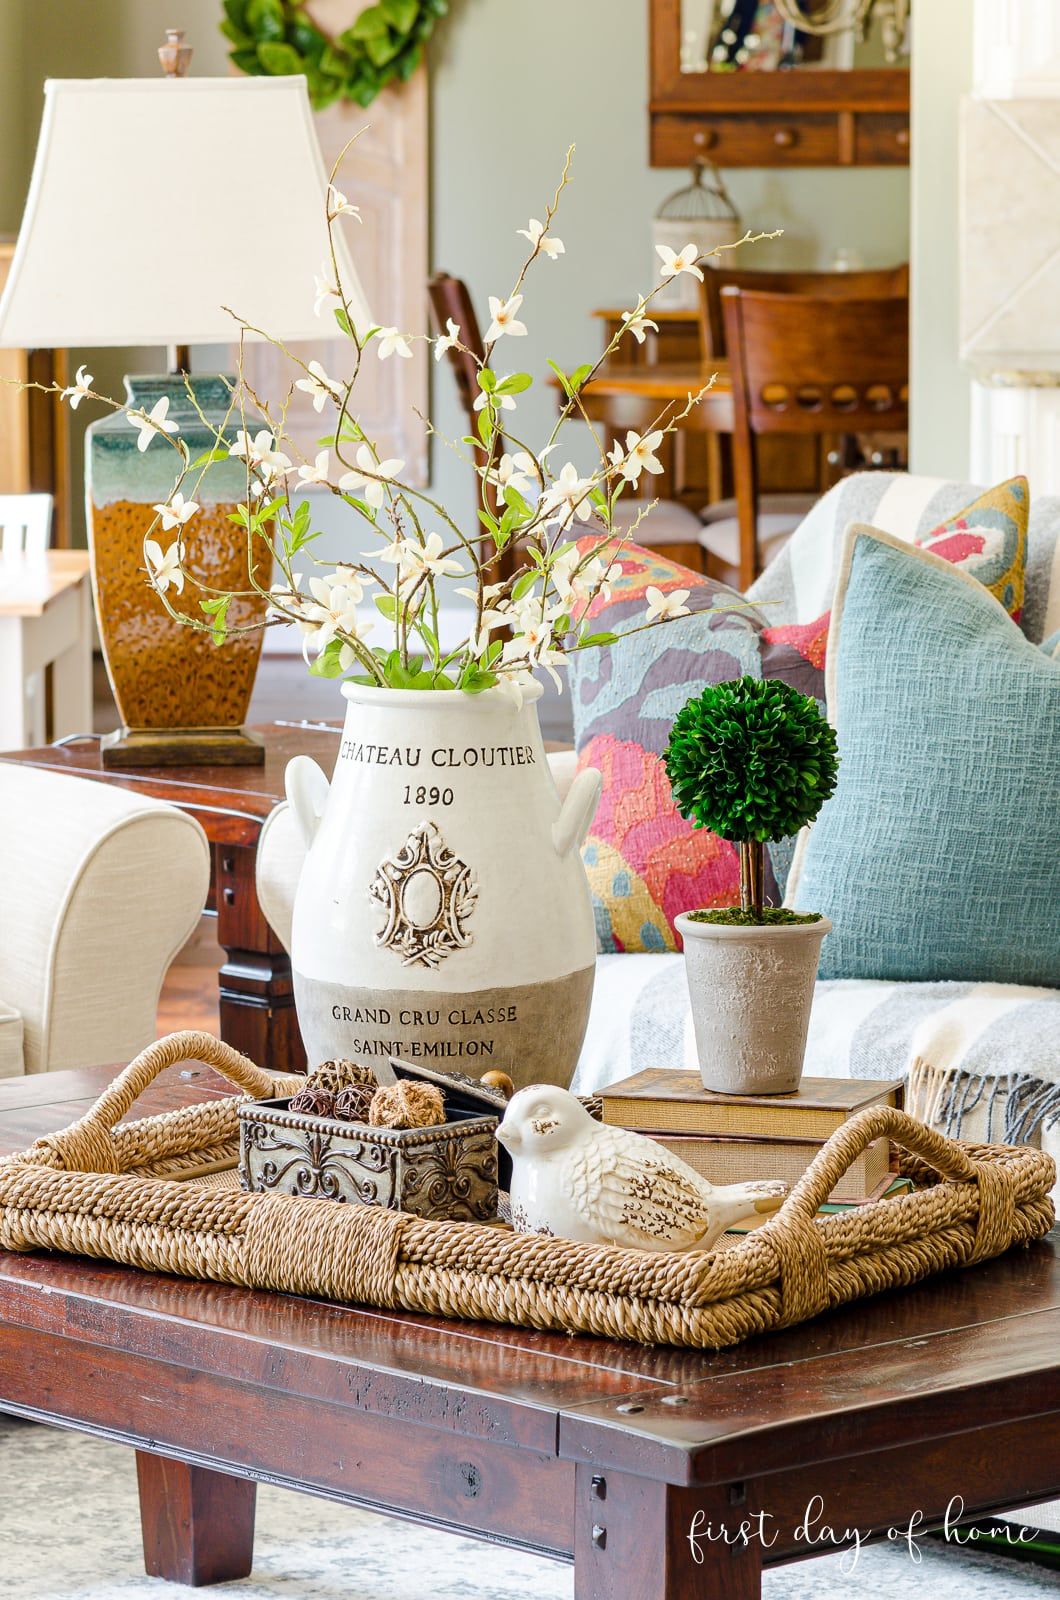 How To Create An Elegant Look With Coffee Table Decor Intended For Coffee Tables With Trays (View 6 of 15)